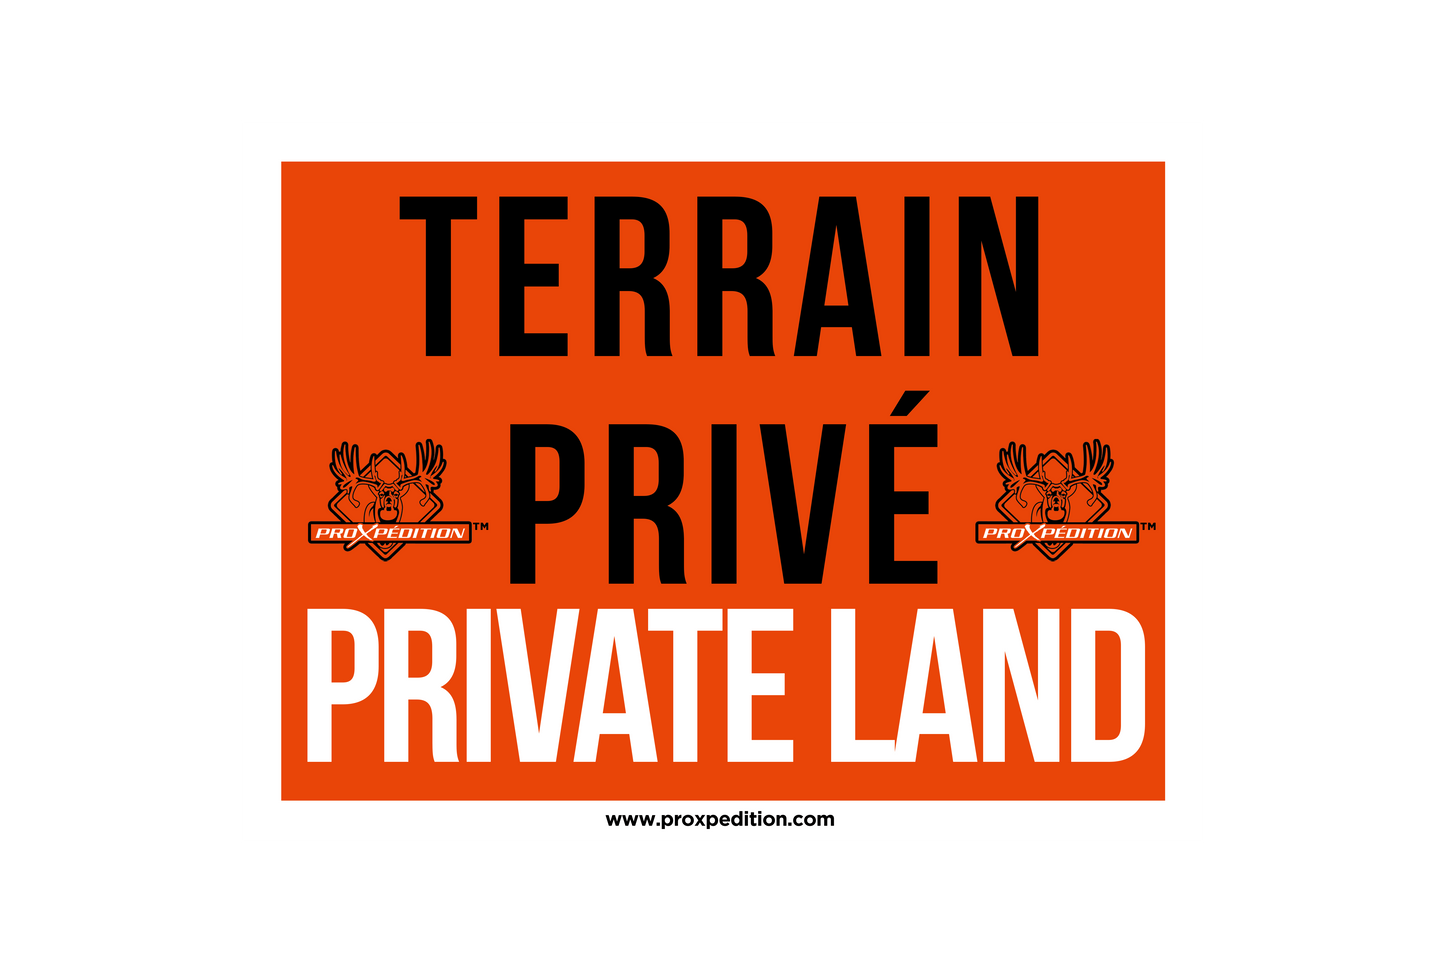 POSTER - Private land